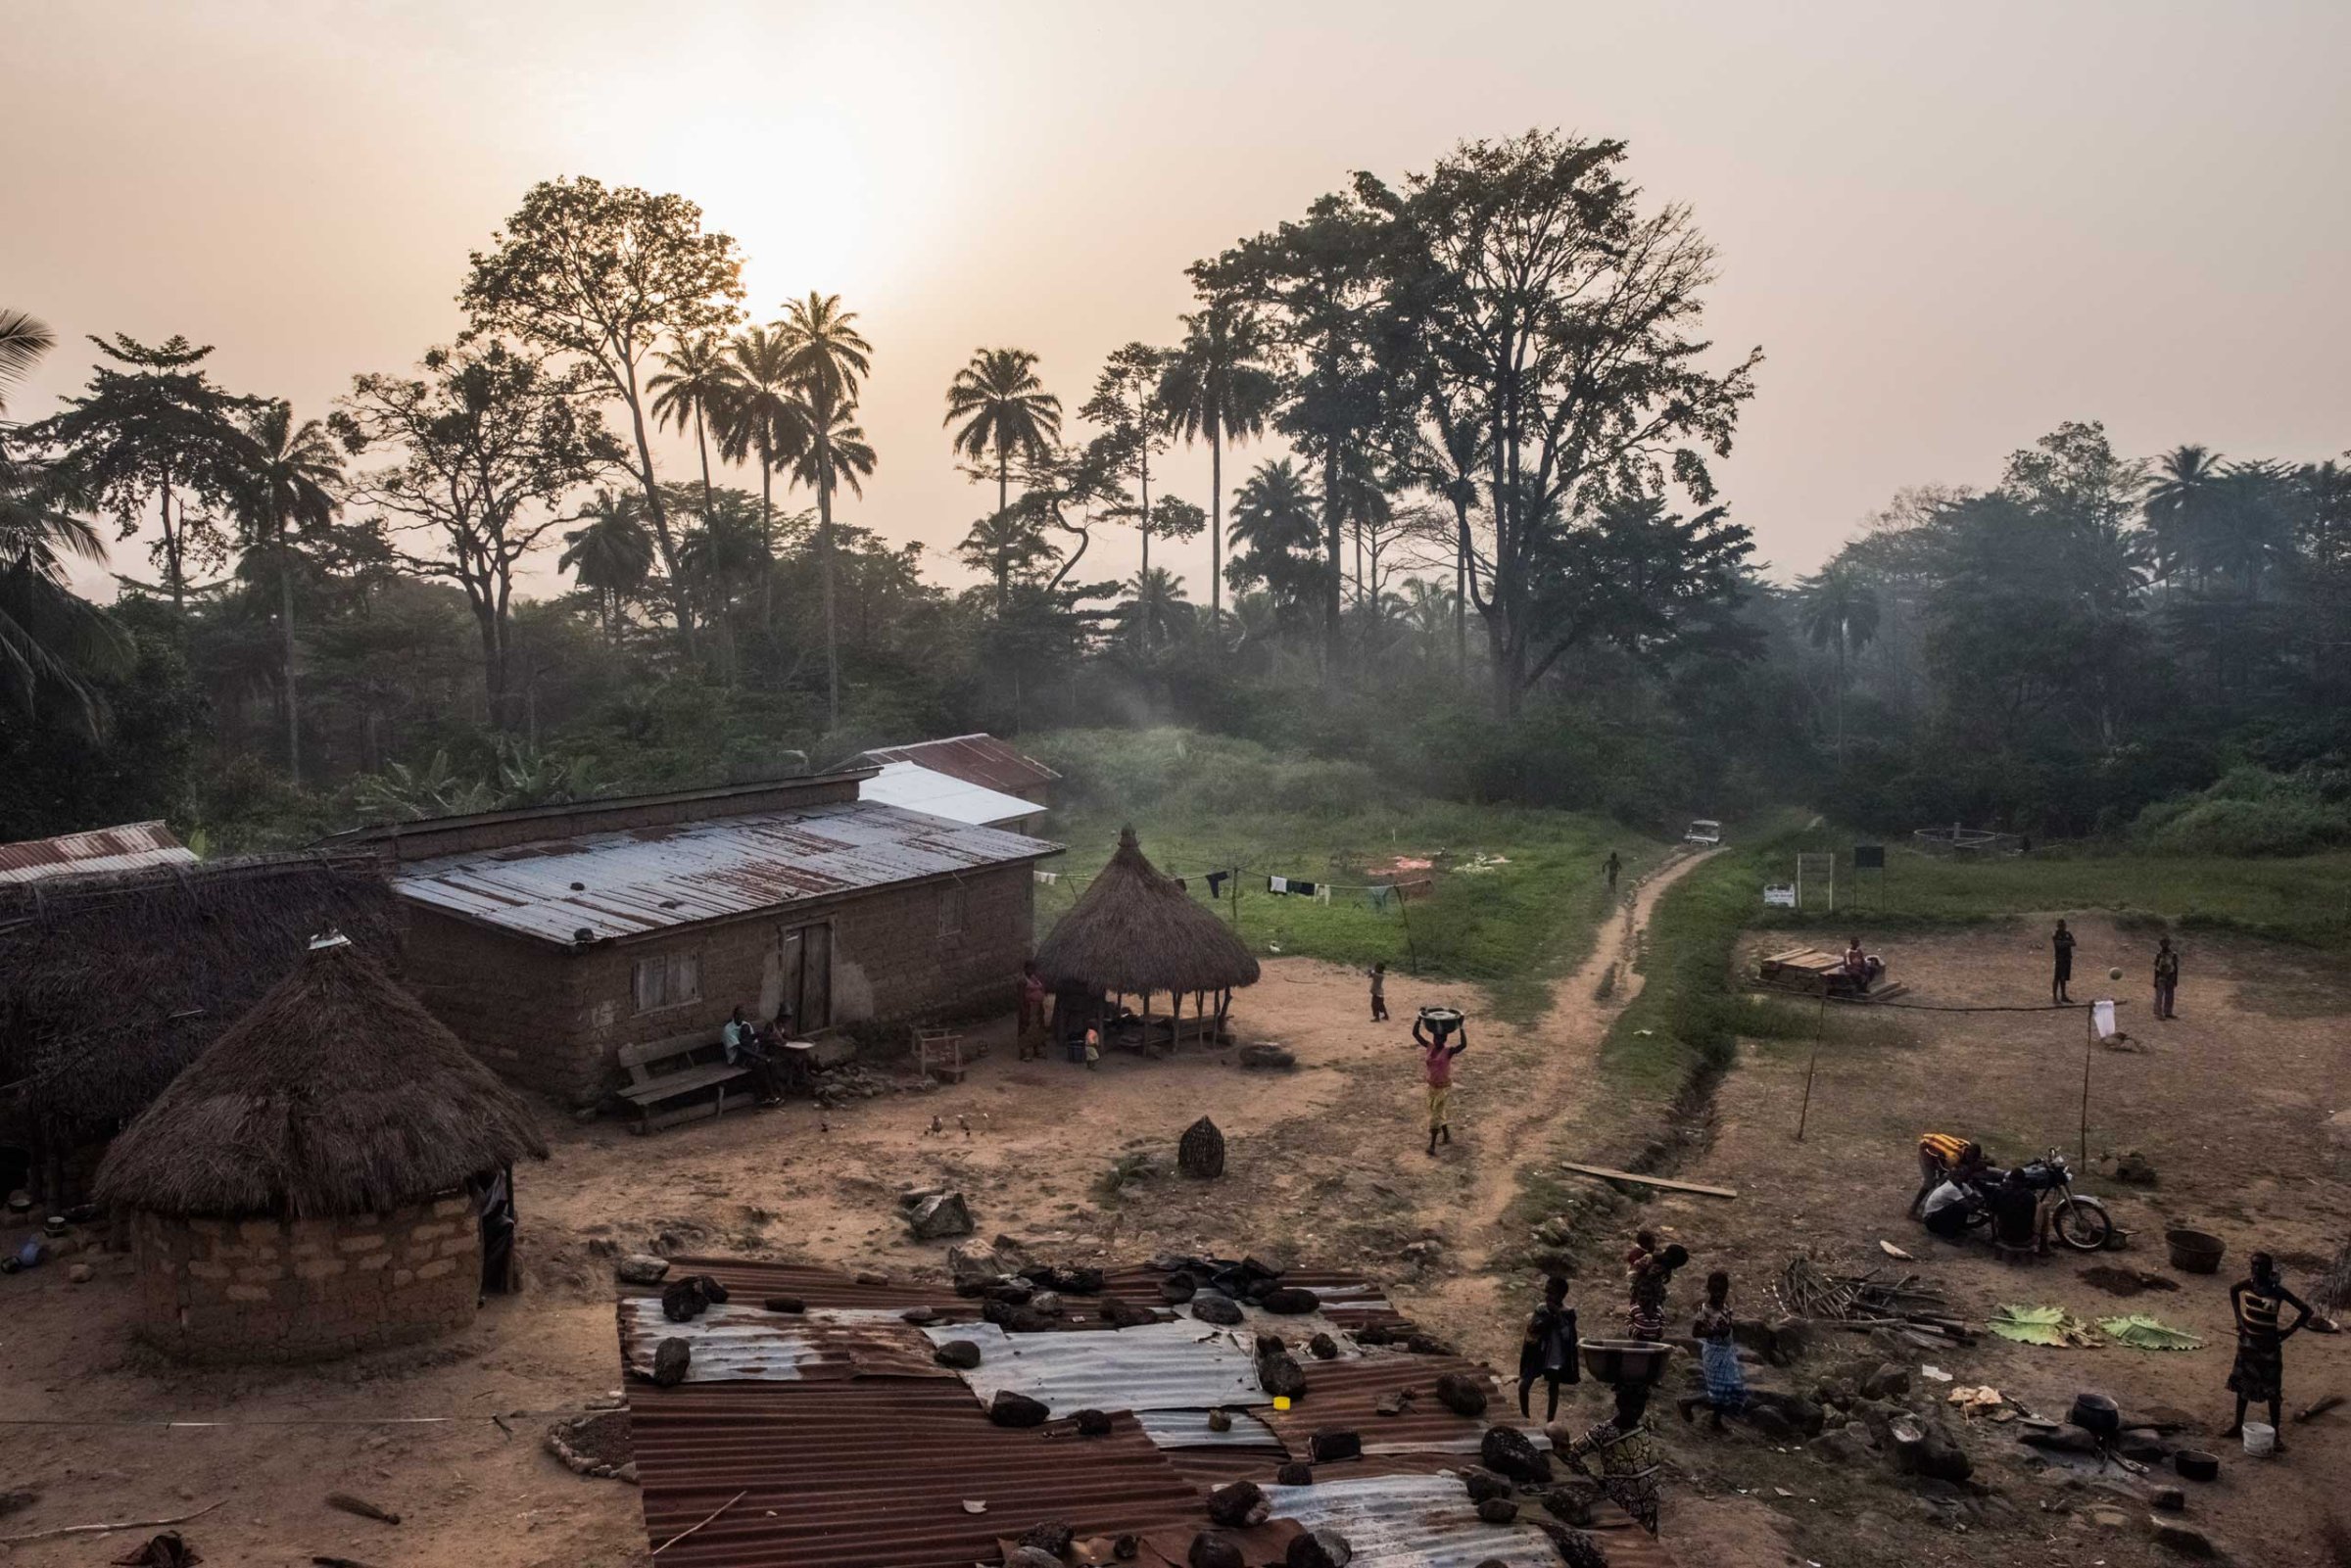 Residents set in for the evening in the village of Meliandou, Guinea, where a 1-year-old boy named Emile Ouamouno came down with symptoms consistent with Ebola and died in late December 2013.